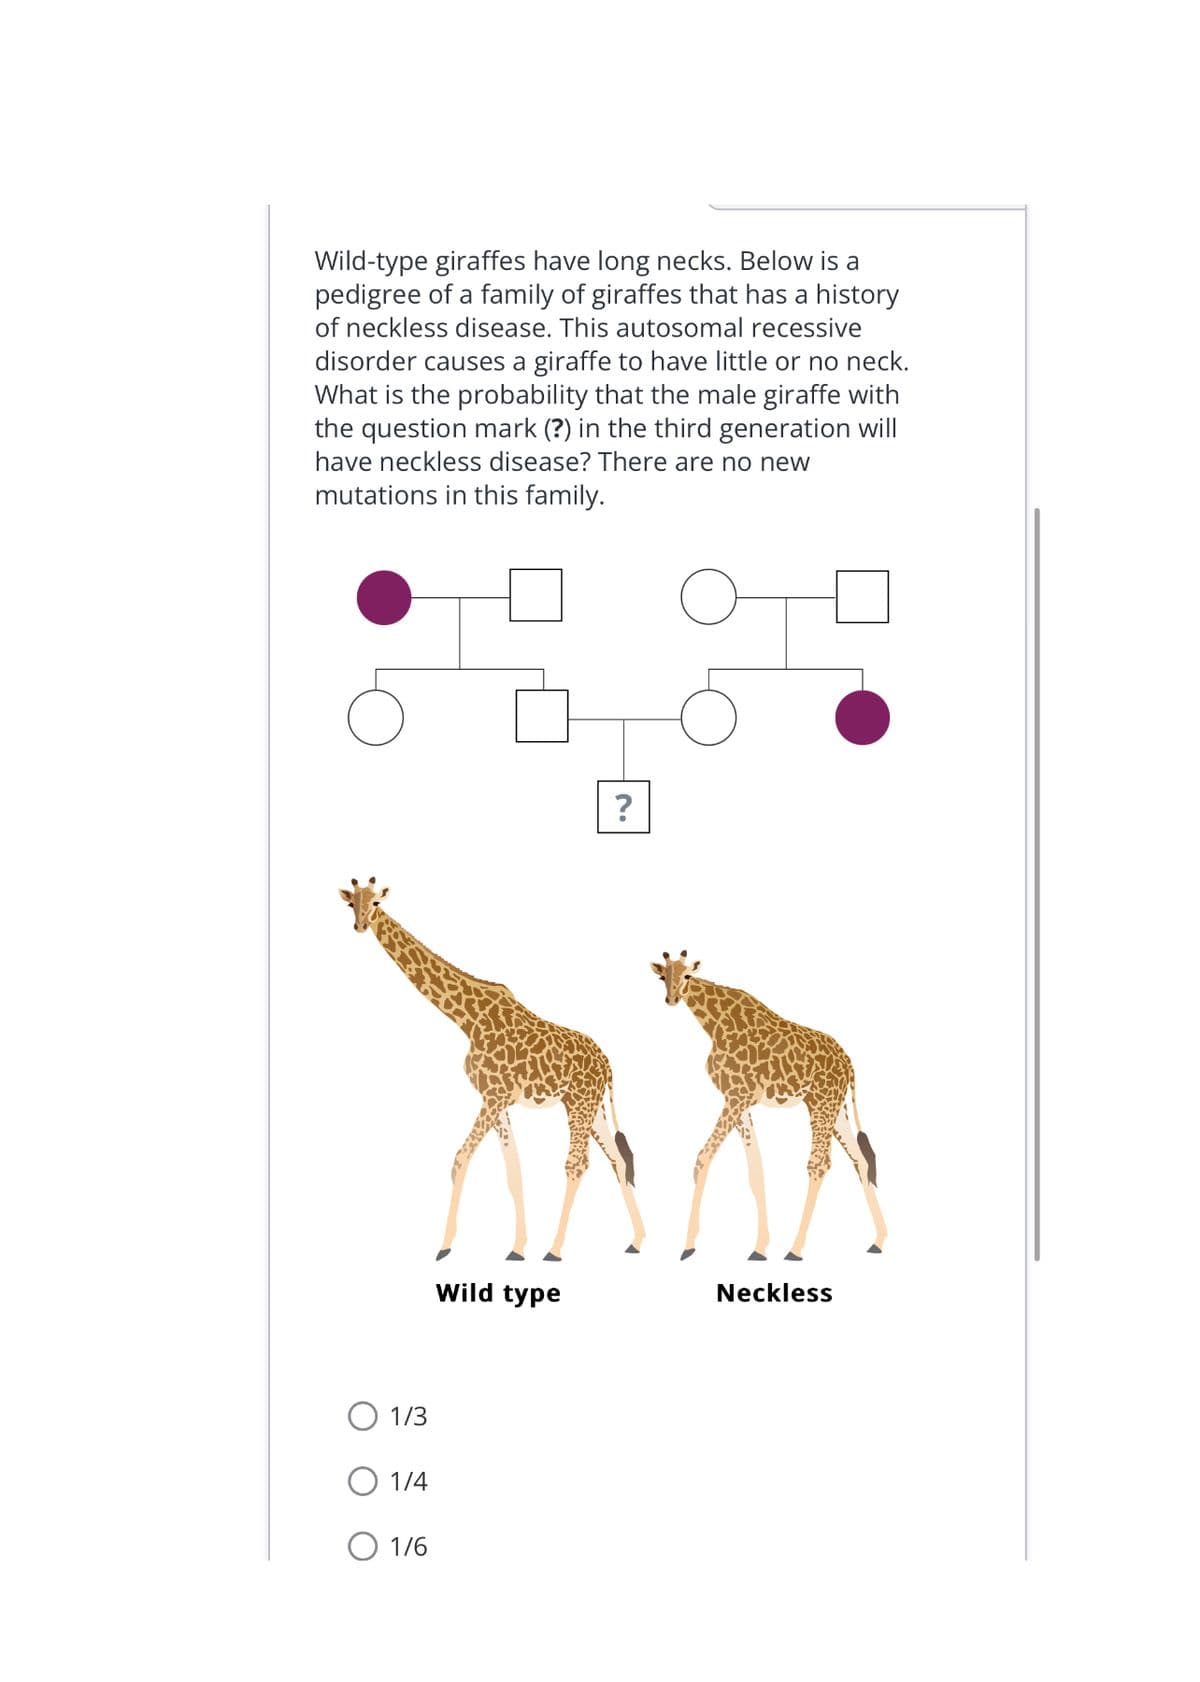 Wild-type giraffes have long necks. Below is a
pedigree of a family of giraffes that has a history
of neckless disease. This autosomal recessive
disorder causes a giraffe to have little or no neck.
What is the probability that the male giraffe with
the question mark (?) in the third generation will
have neckless disease? There are no new
mutations in this family.
1/3
O 1/4
O 1/6
1.
Wild type
Neckless